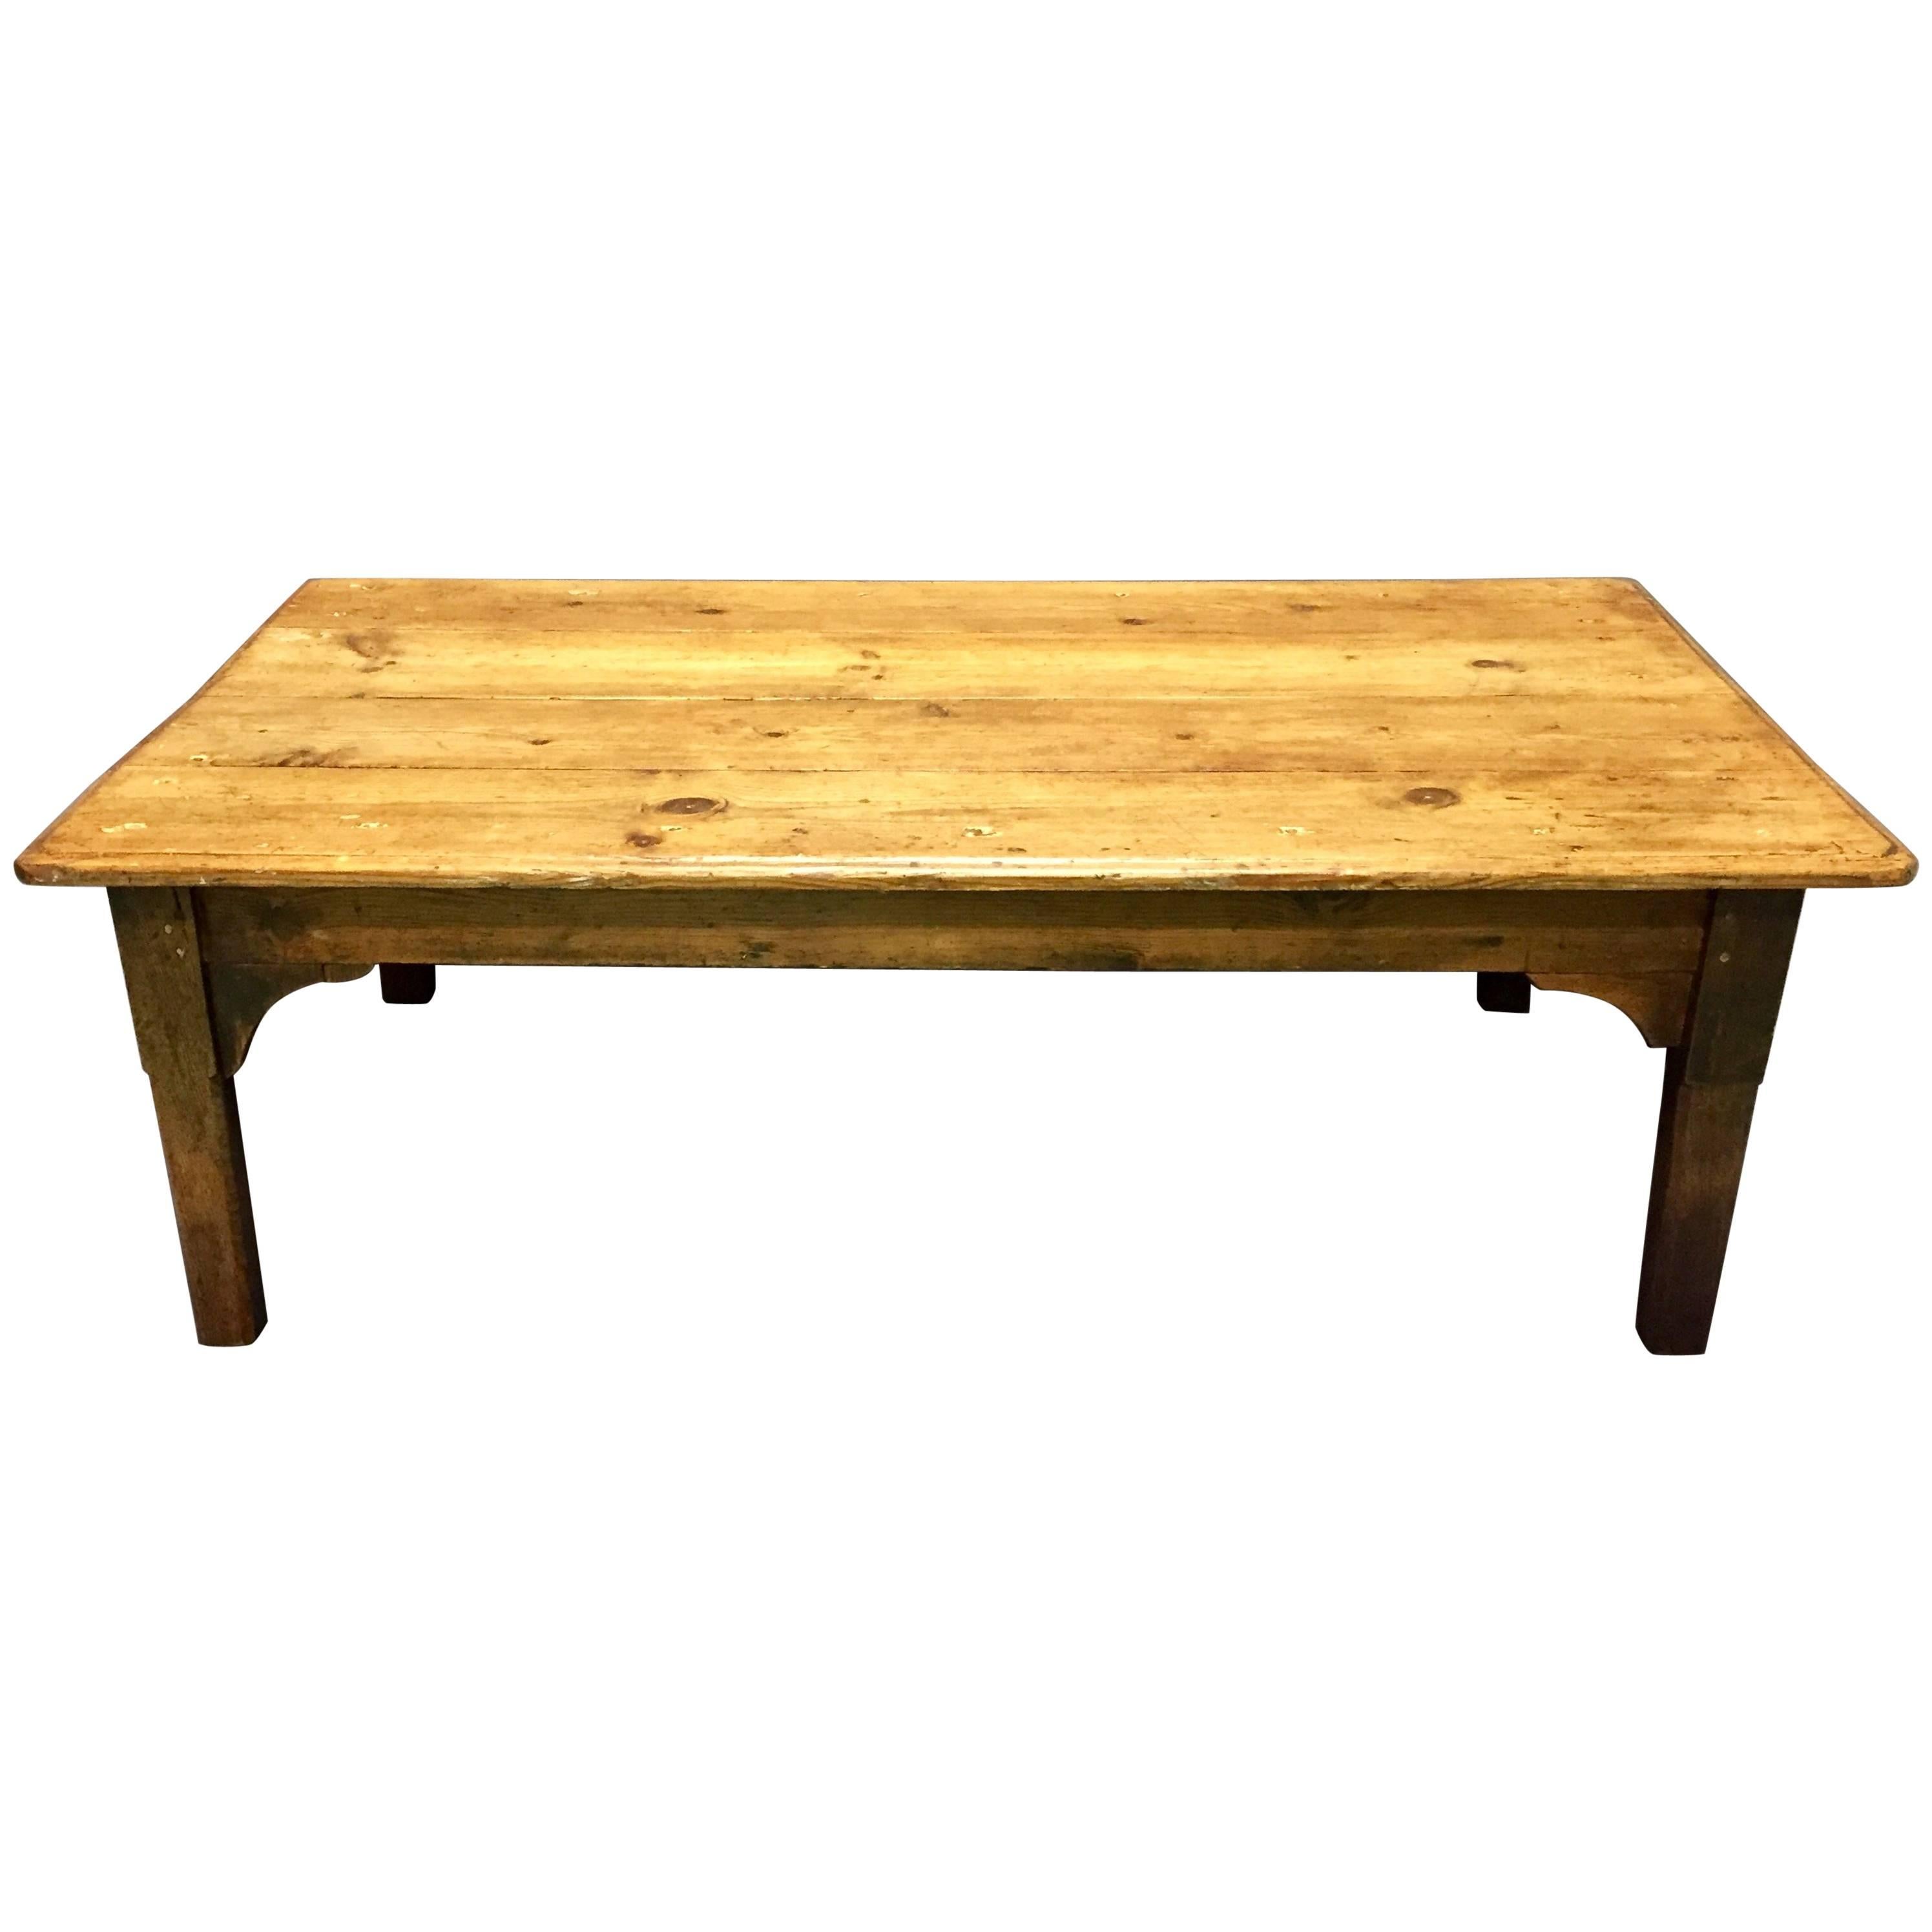 20th Century Rustic Pine Coffee Table